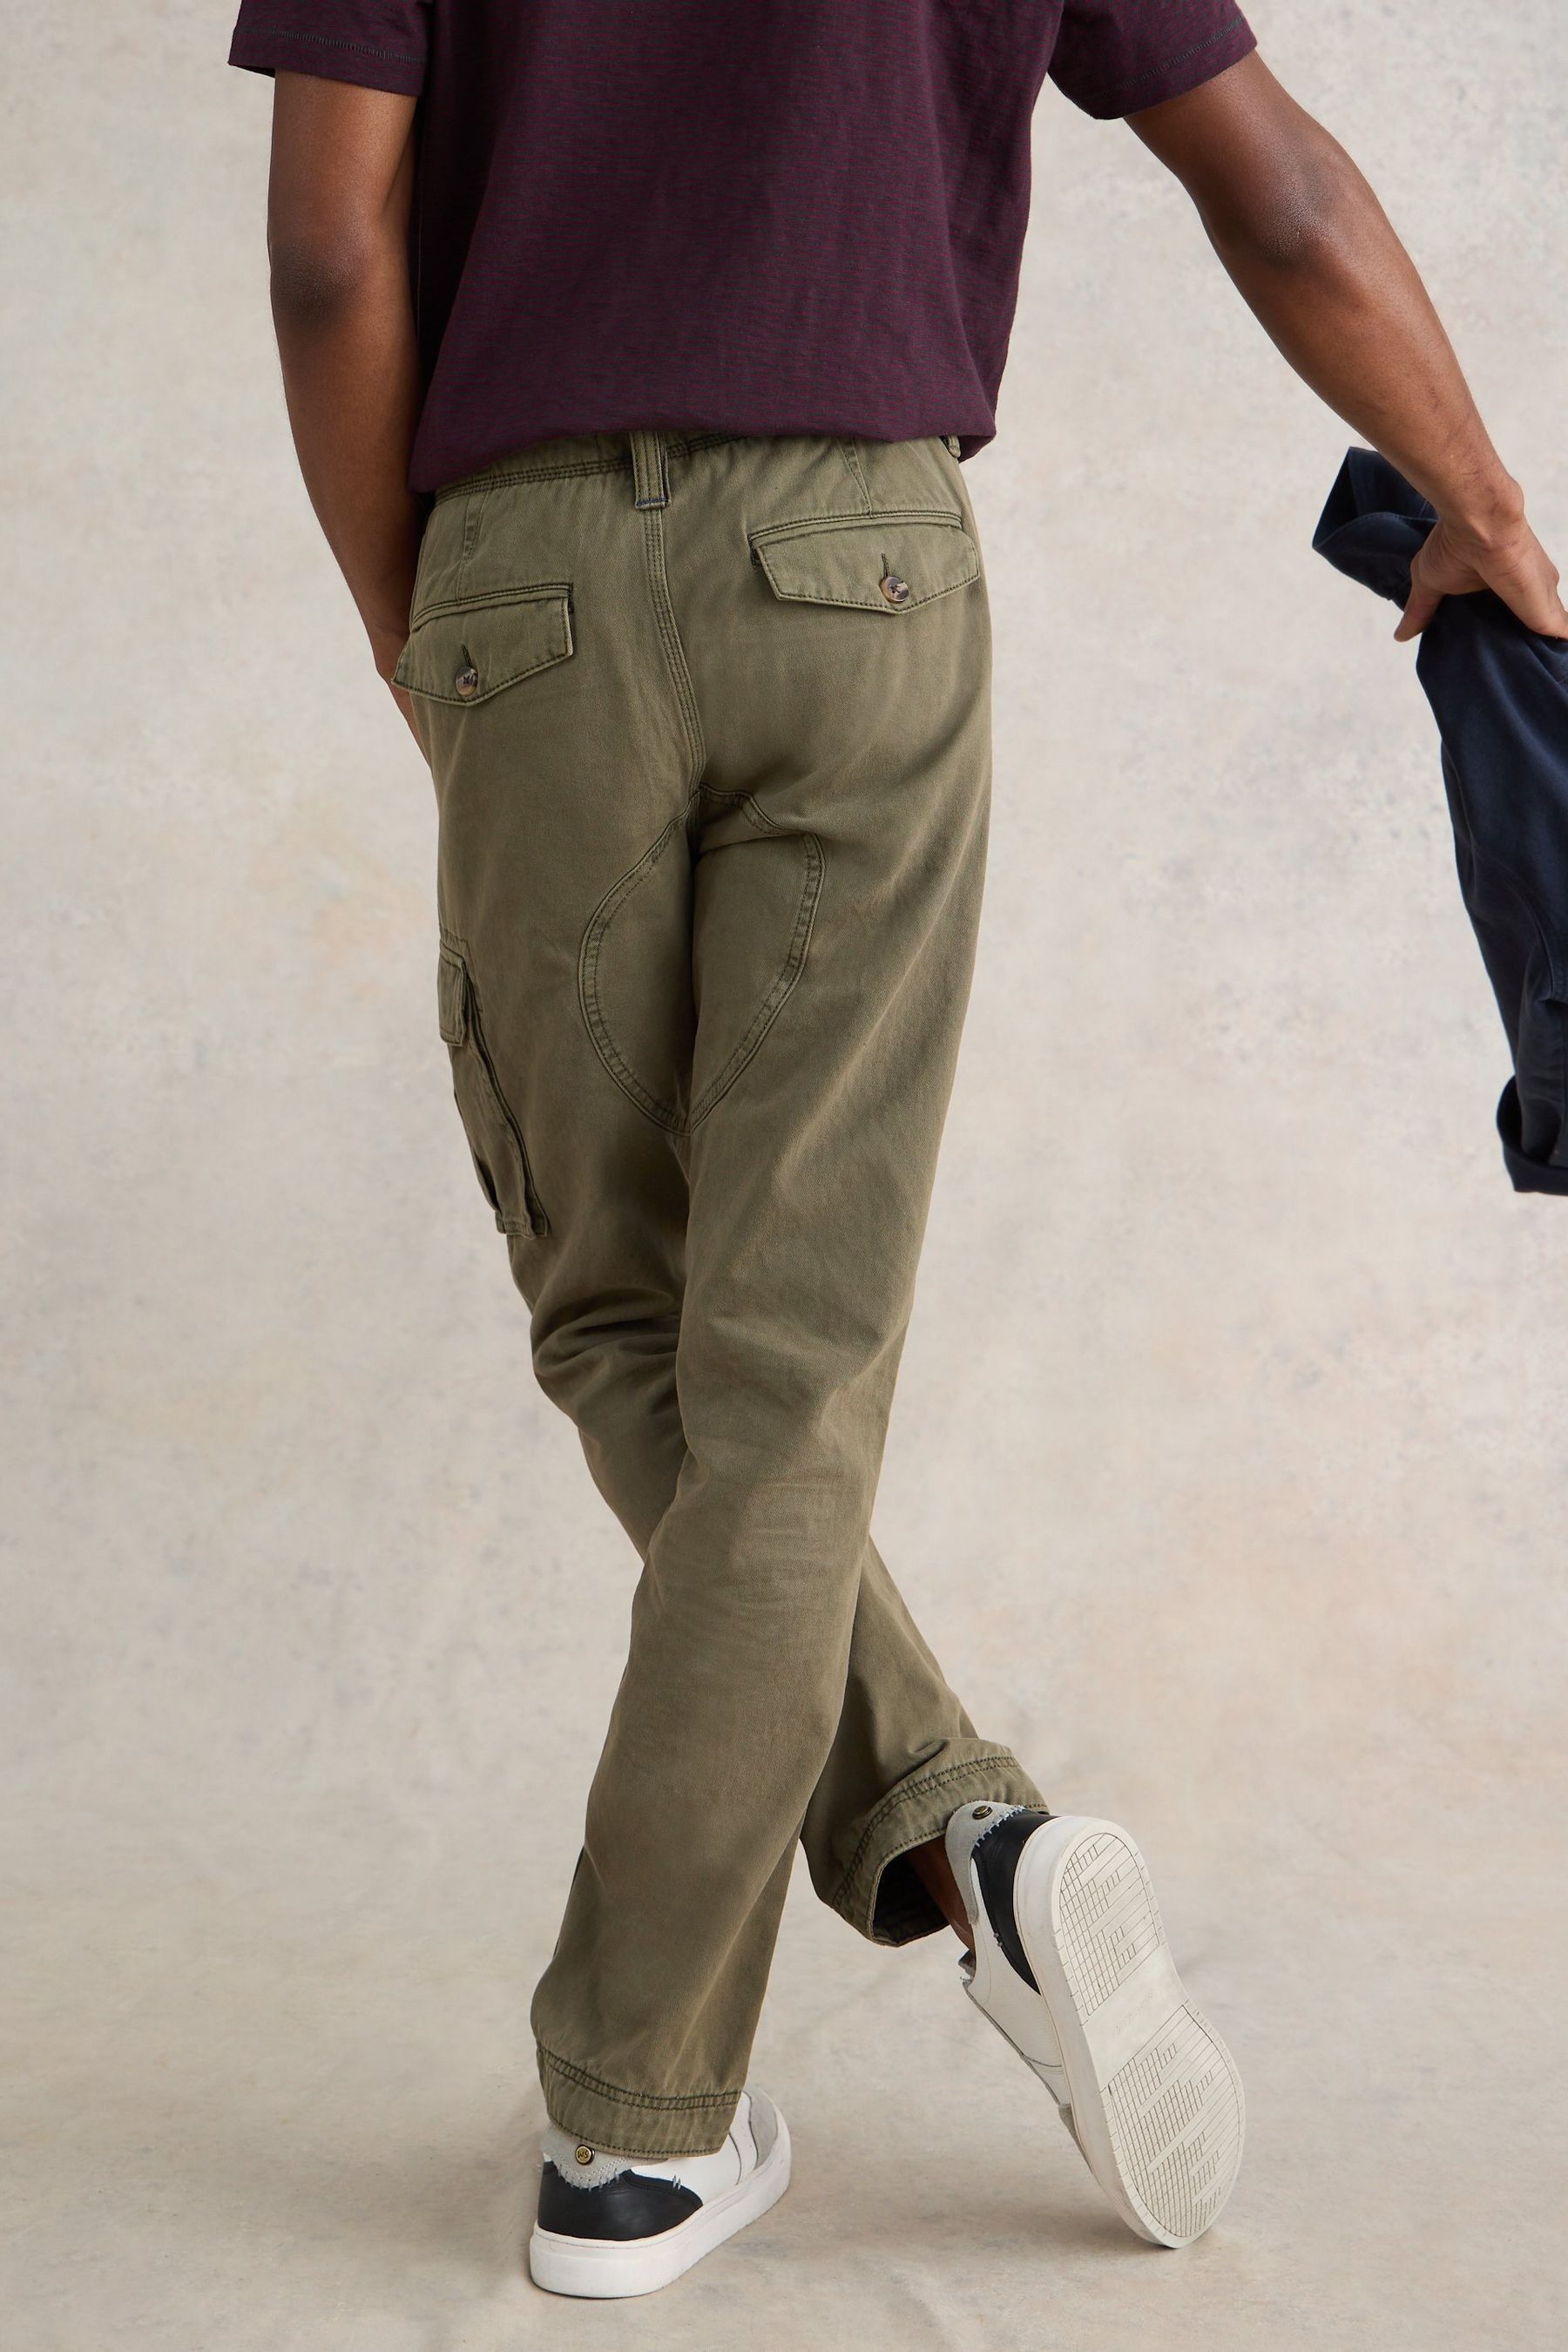 Buy White Stuff Kegworth Cargo Trousers from the Next UK online shop